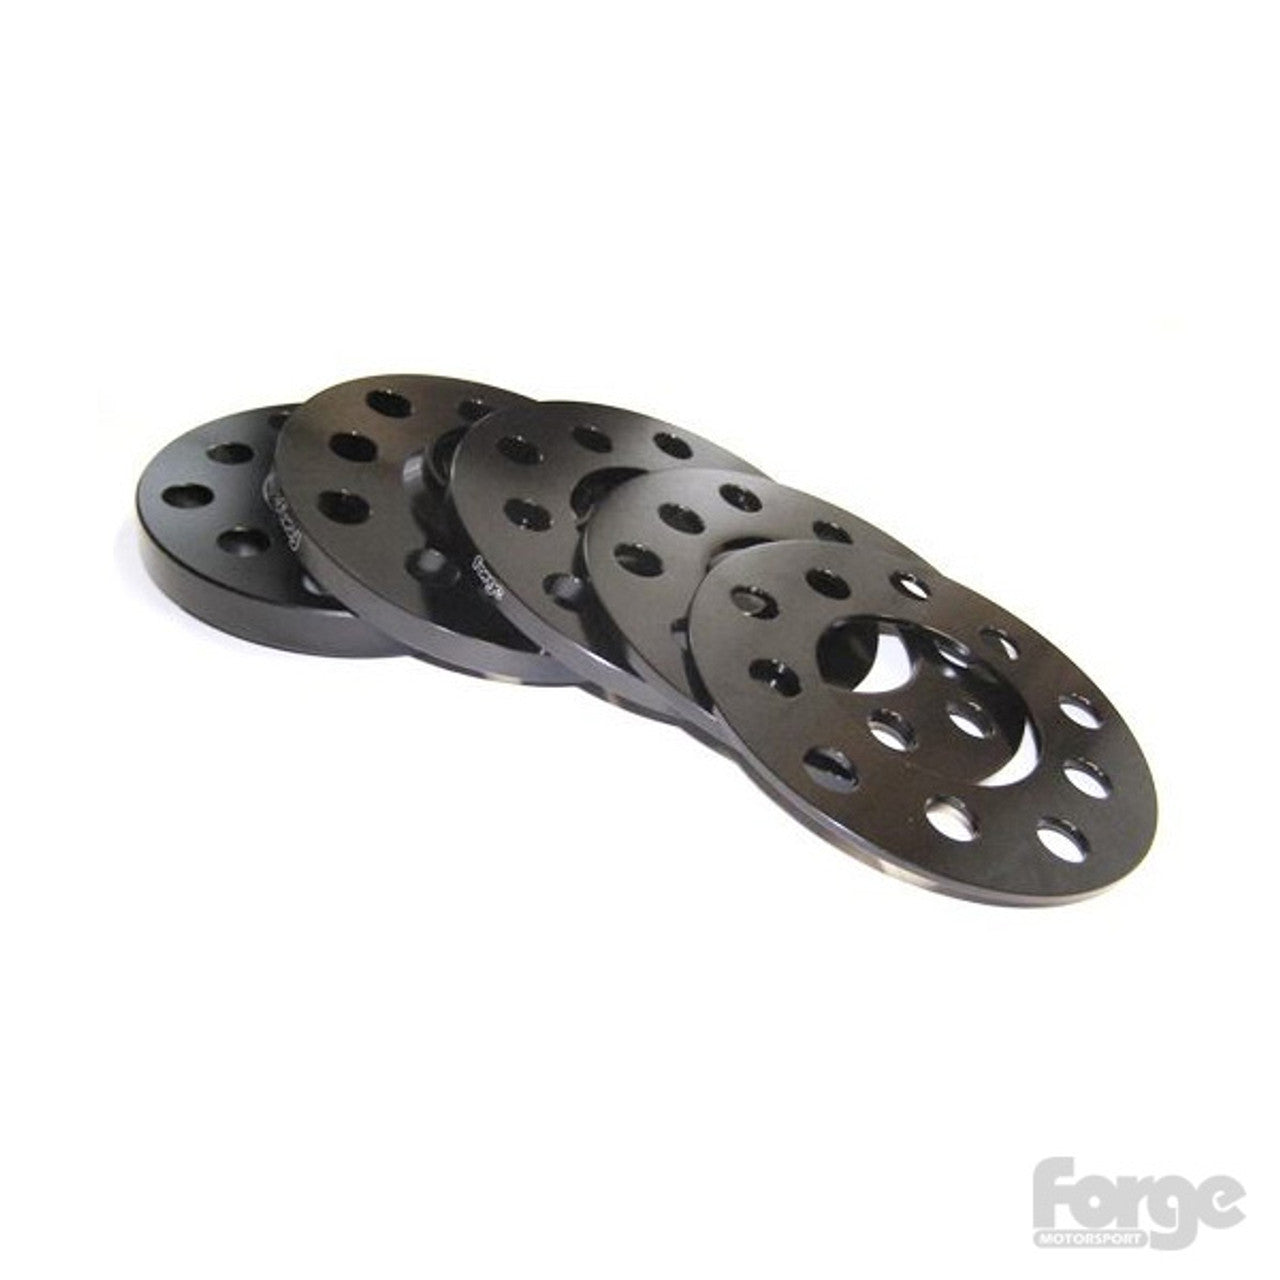 Forge 8mm (per side) flat spacers